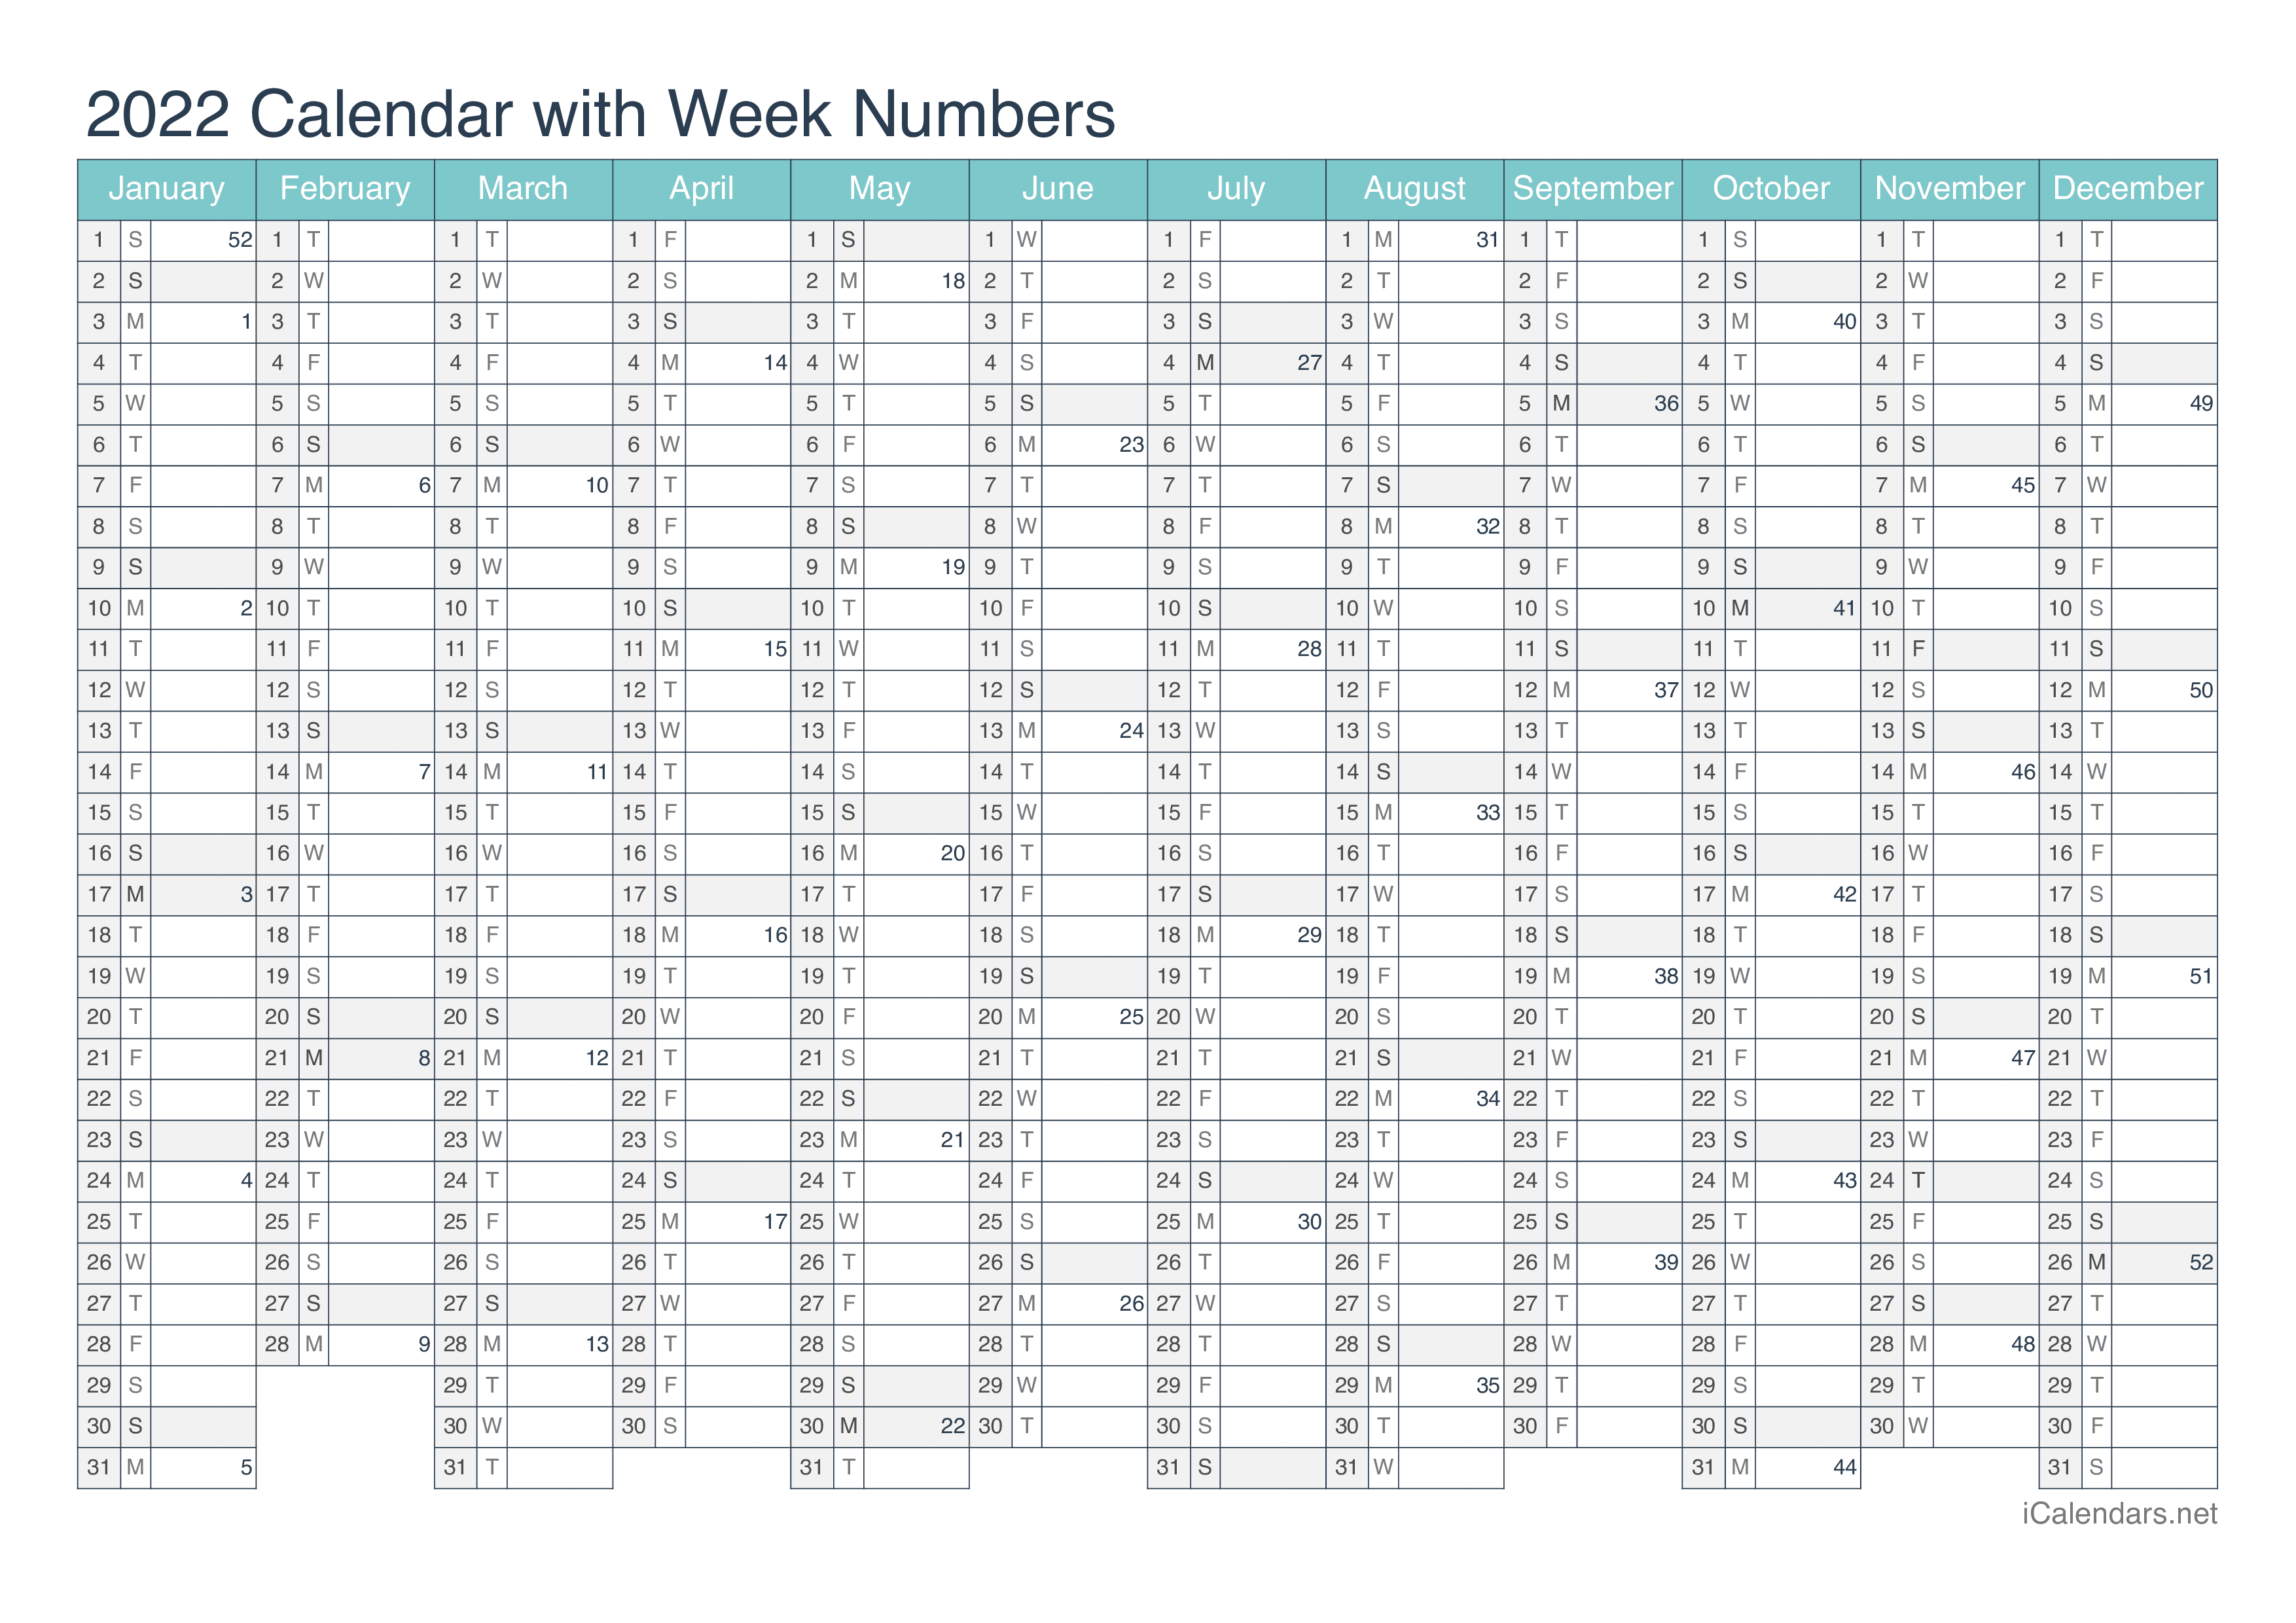 2022 Calendar with week numbers - Turquoise